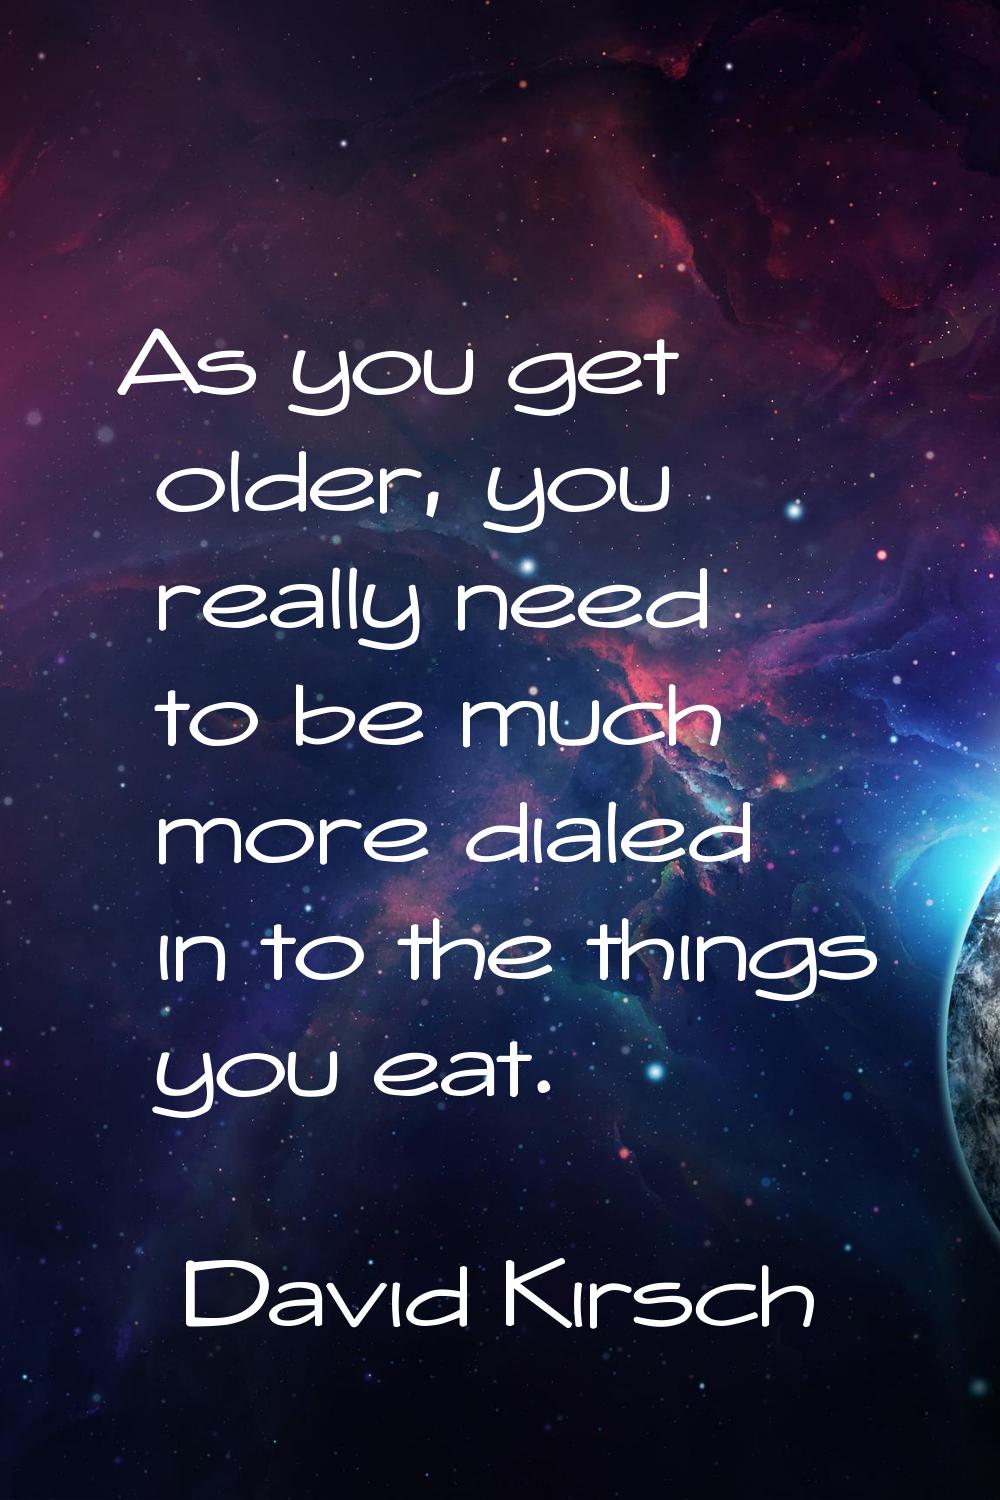 As you get older, you really need to be much more dialed in to the things you eat.